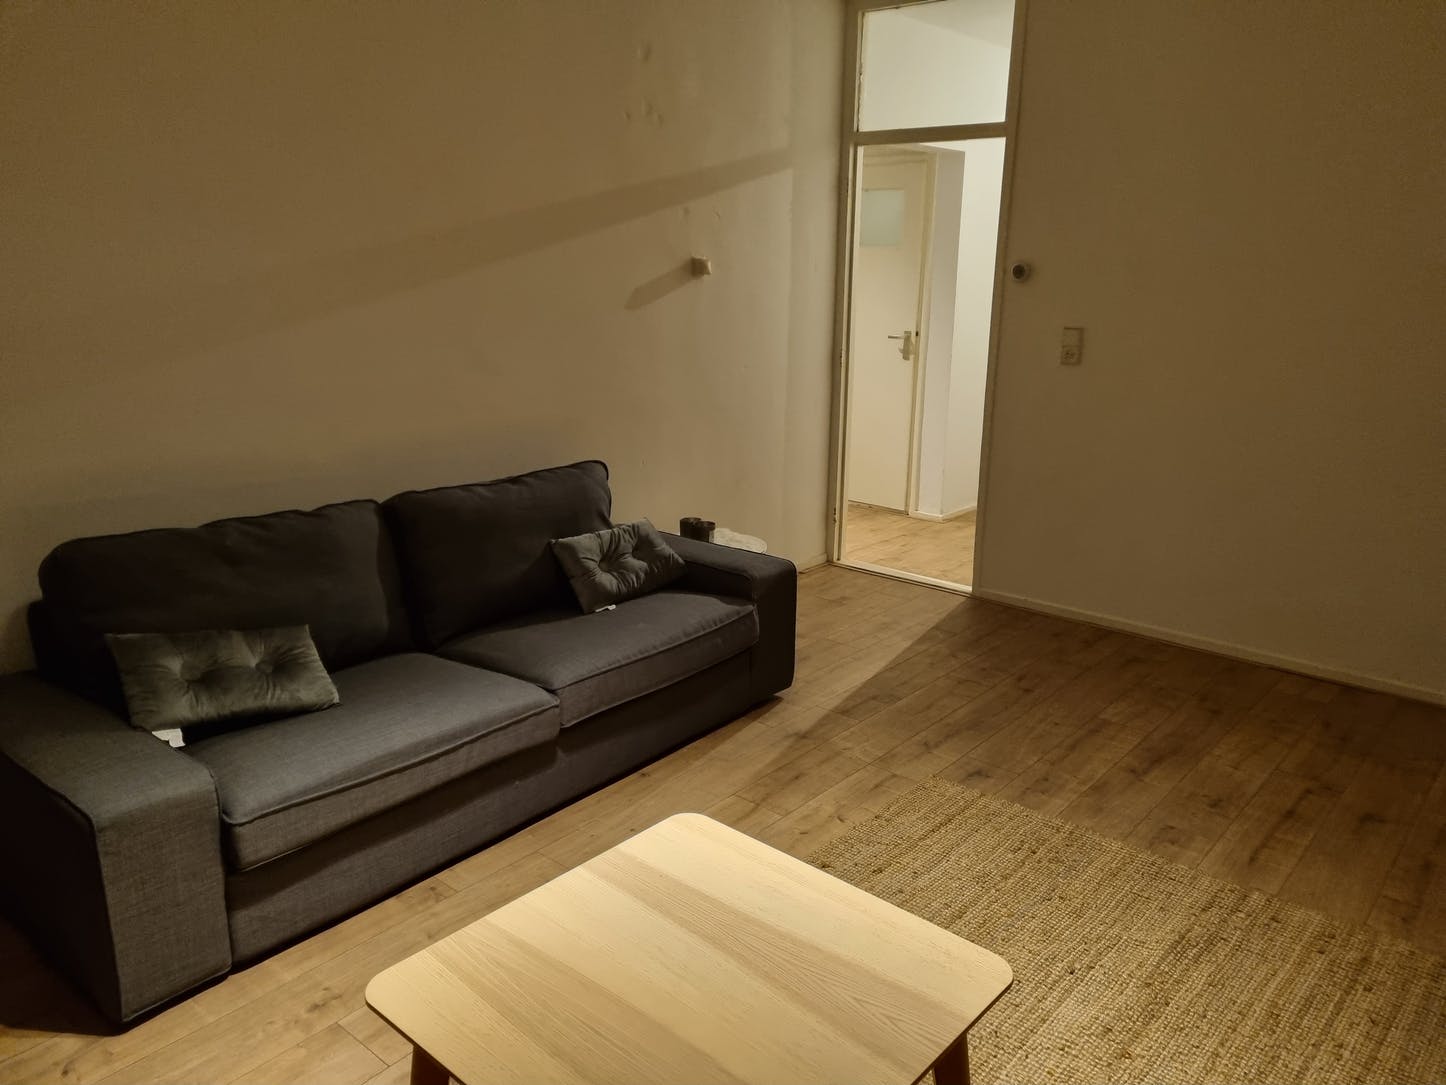 Zilverberg - Shared apartment in Amsterdam for expats